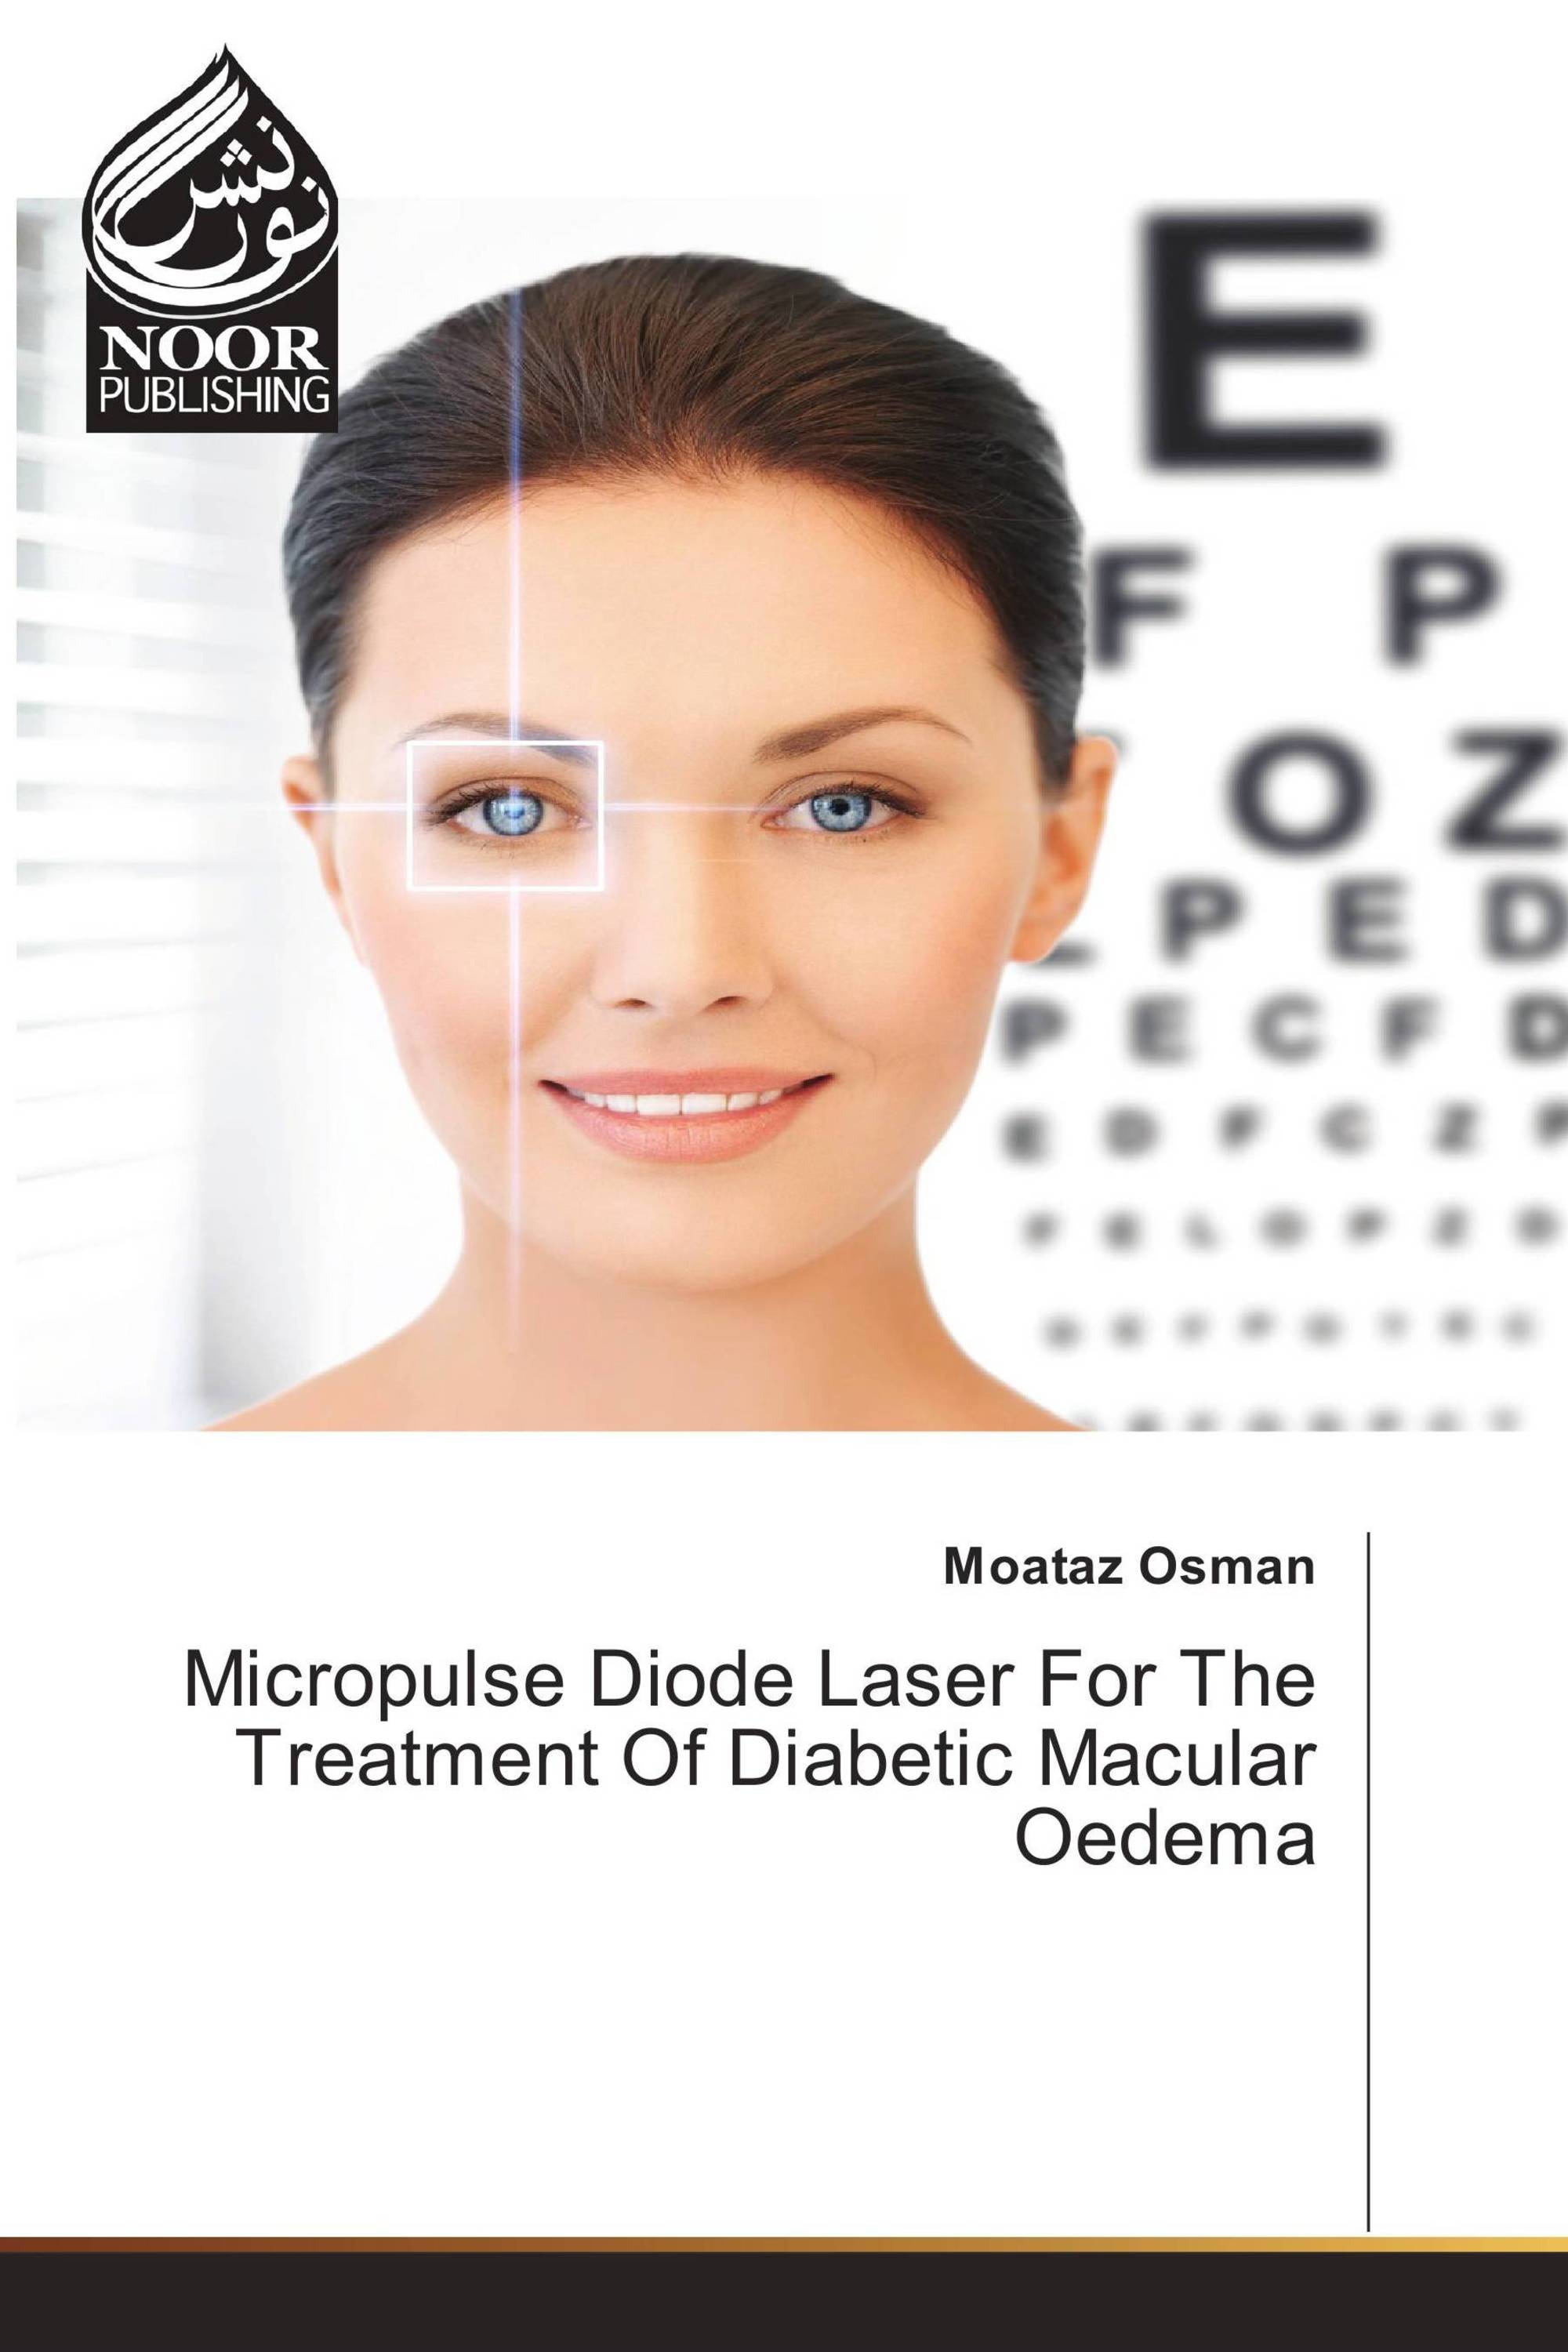 Micropulse Diode Laser For The Treatment Of Diabetic Macular Oedema